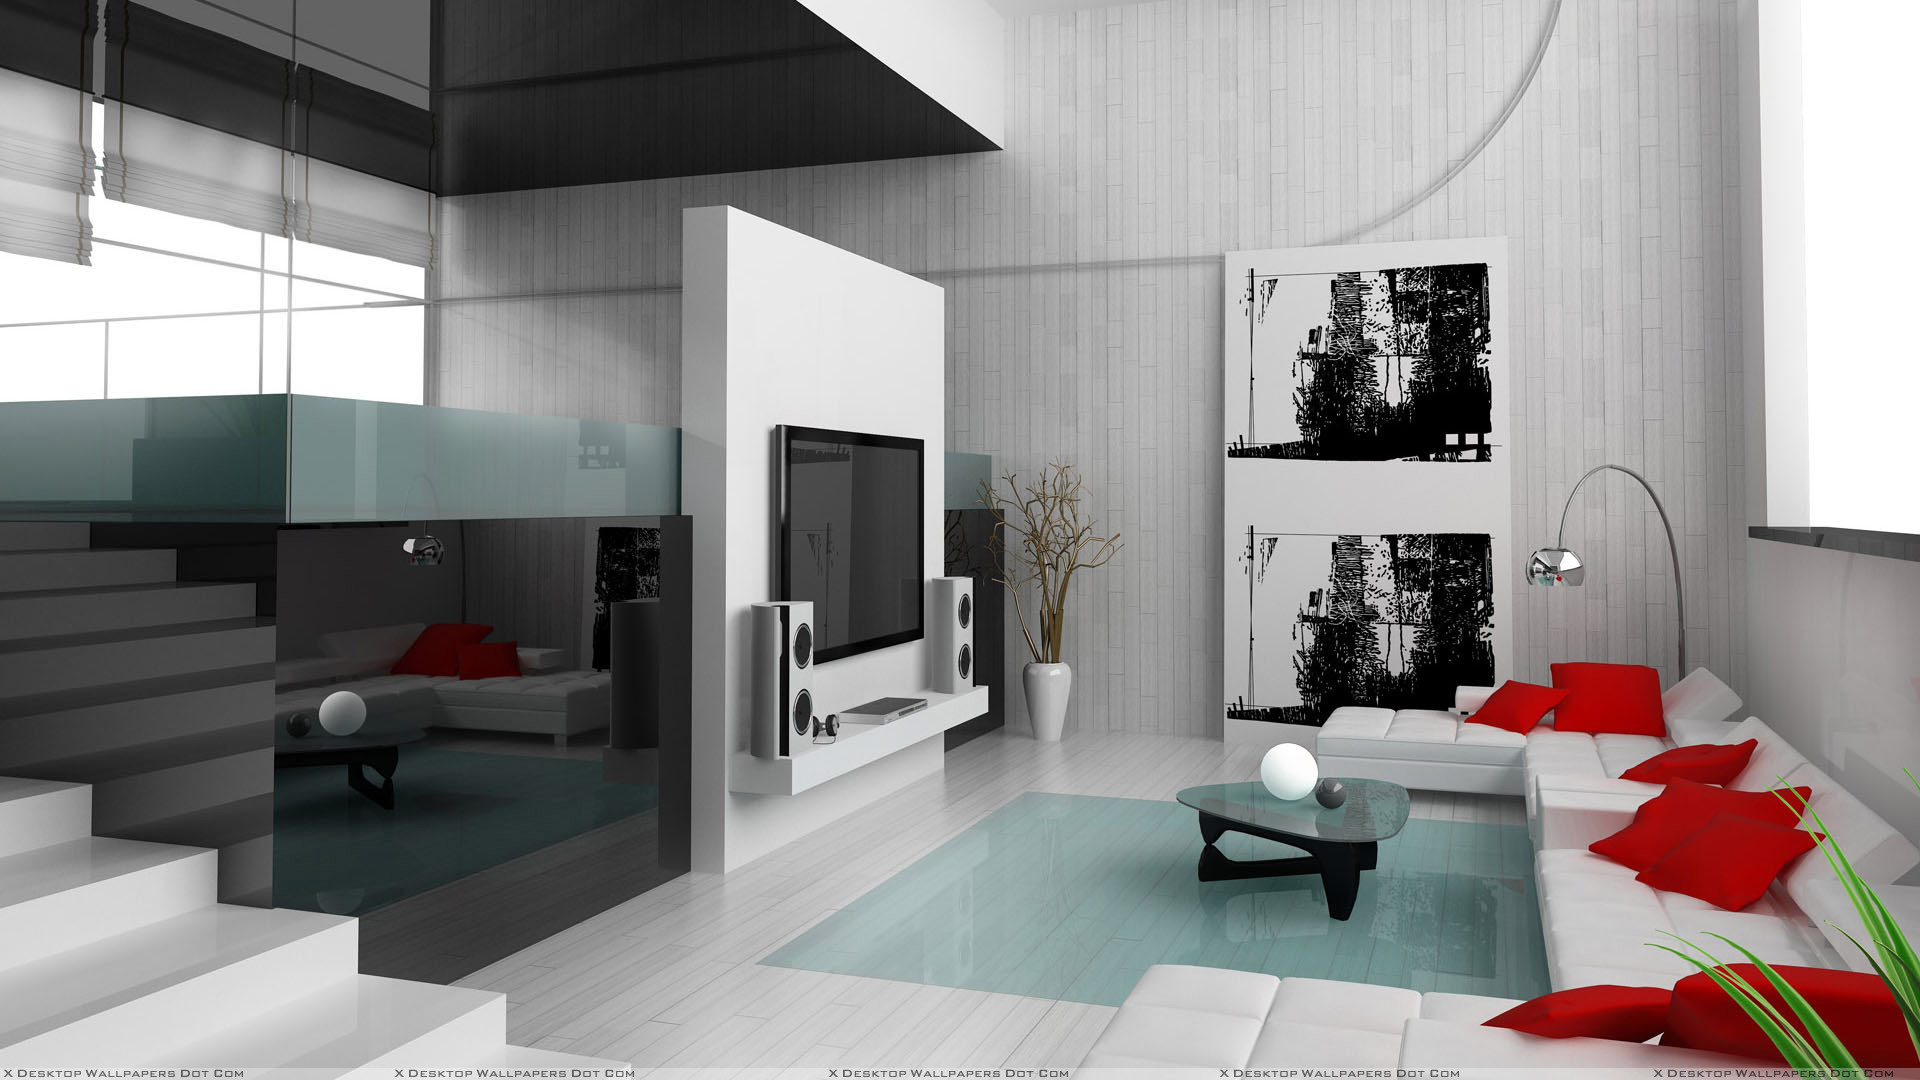 1920x1080 You are viewing wallpaper titled "Black And White Home Theater ...